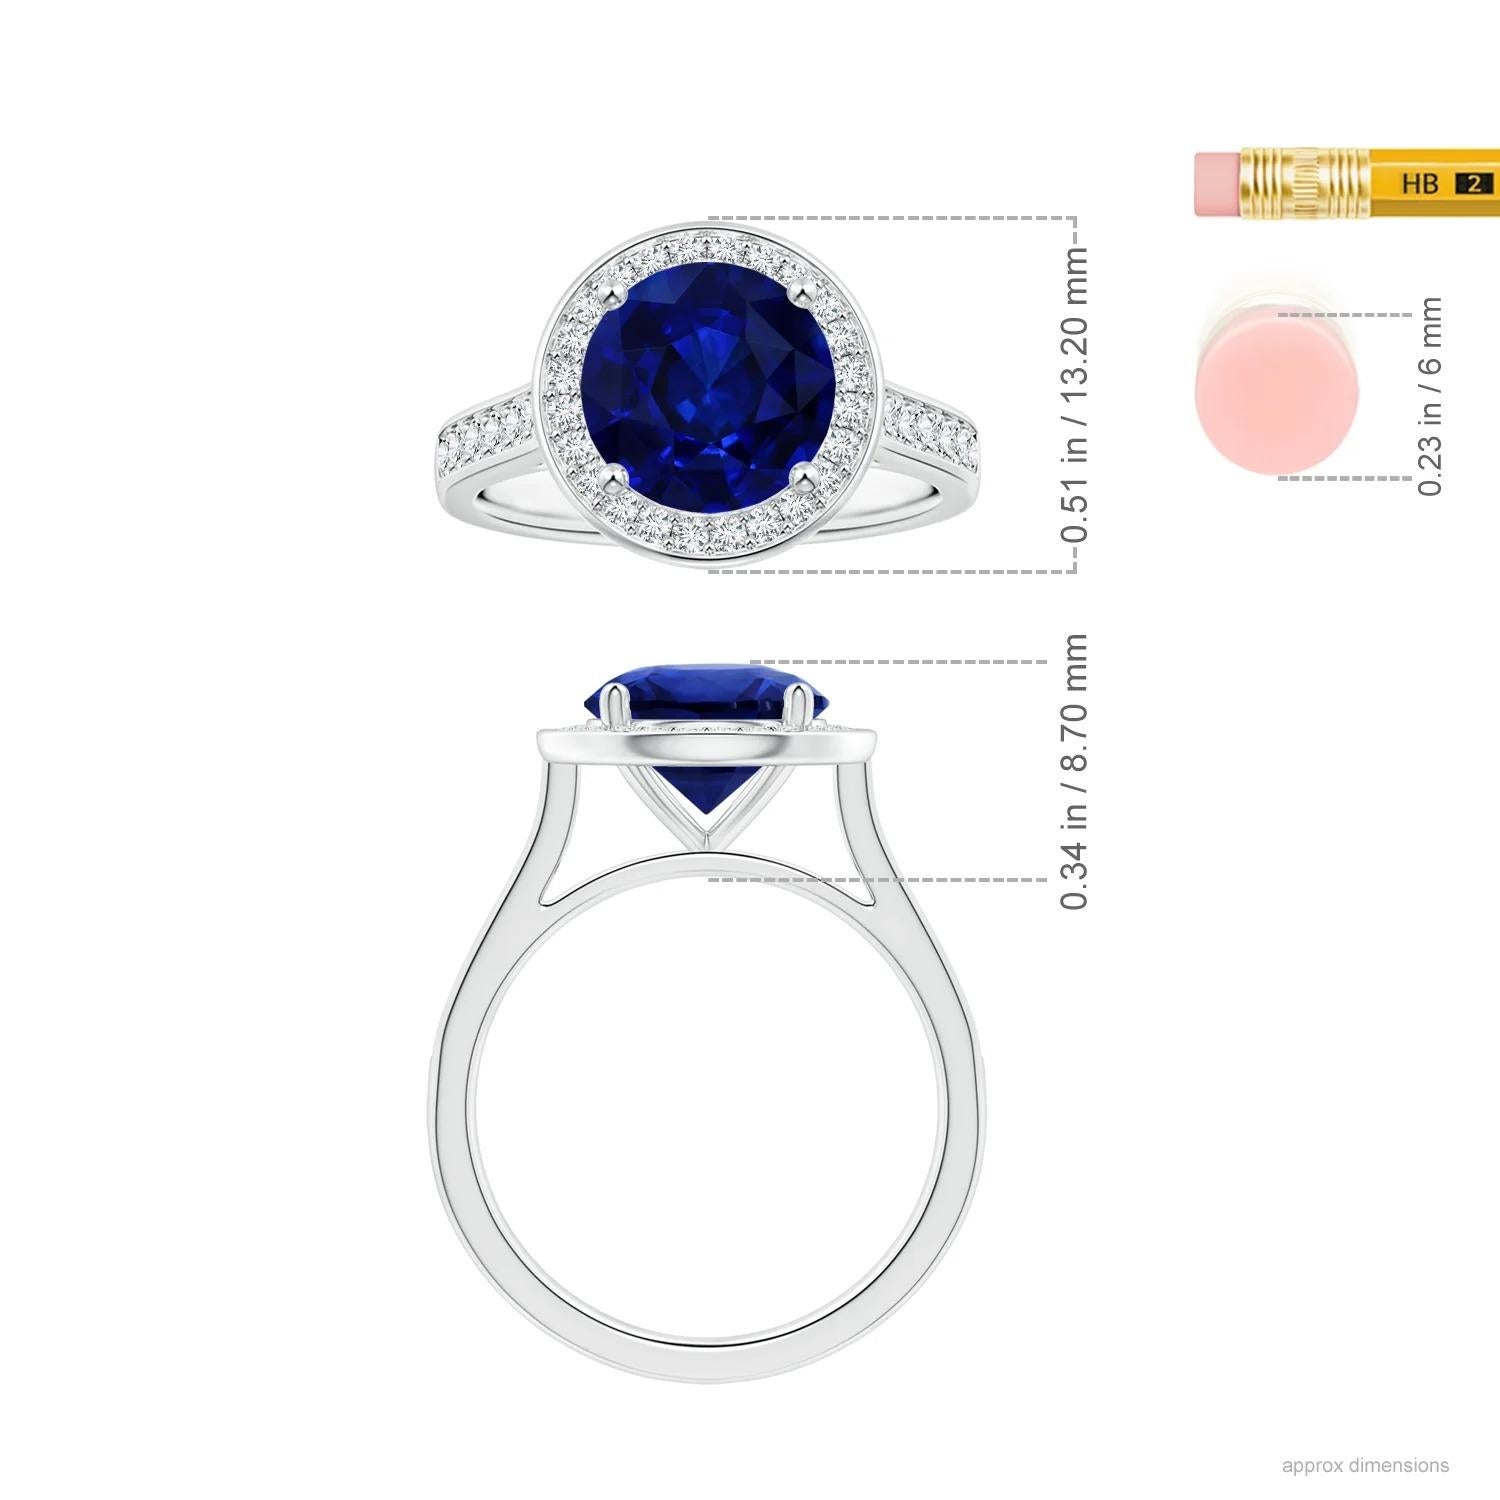 For Sale:  Angara Gia Certified Blue Sapphire Halo Ring in White Gold with Diamonds 5